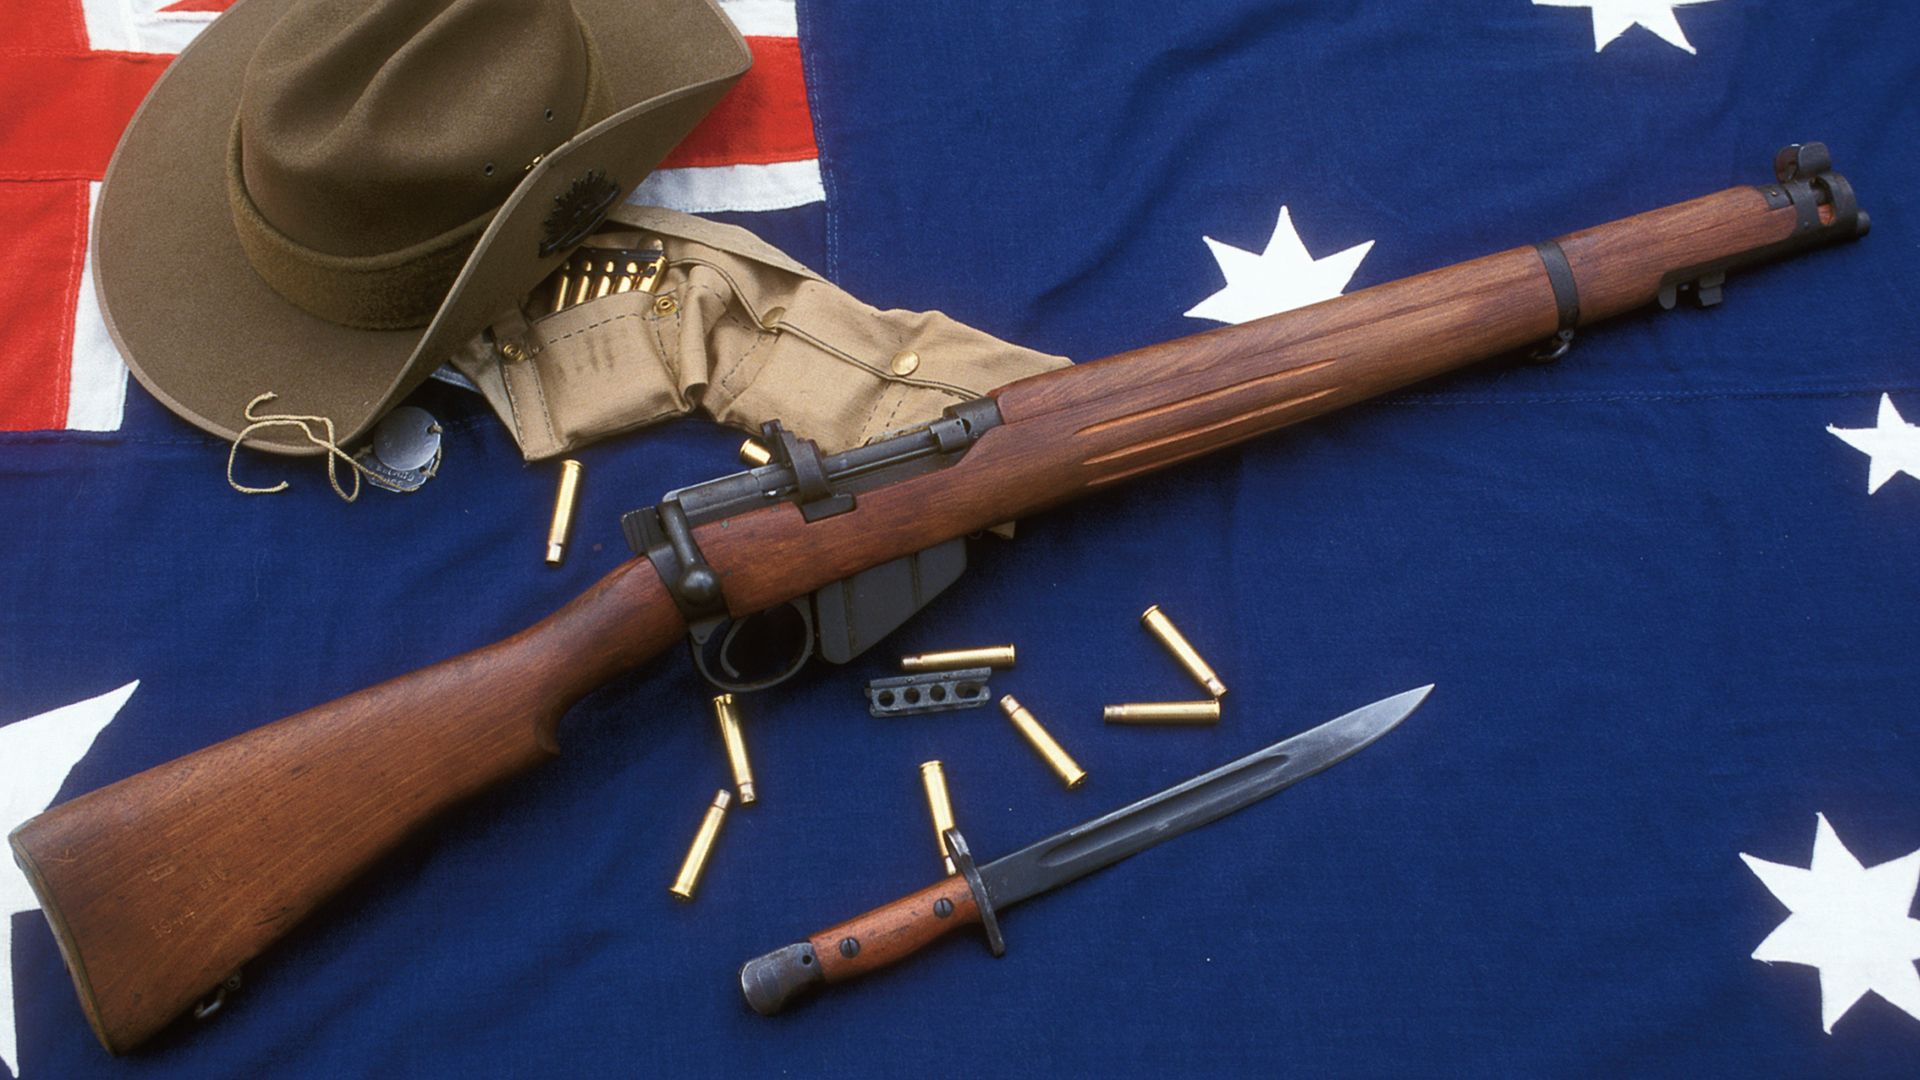 A GUIDE TO THE LEE ENFIELD .303 RIFLE No. 1, S.M.L.E MARKS III